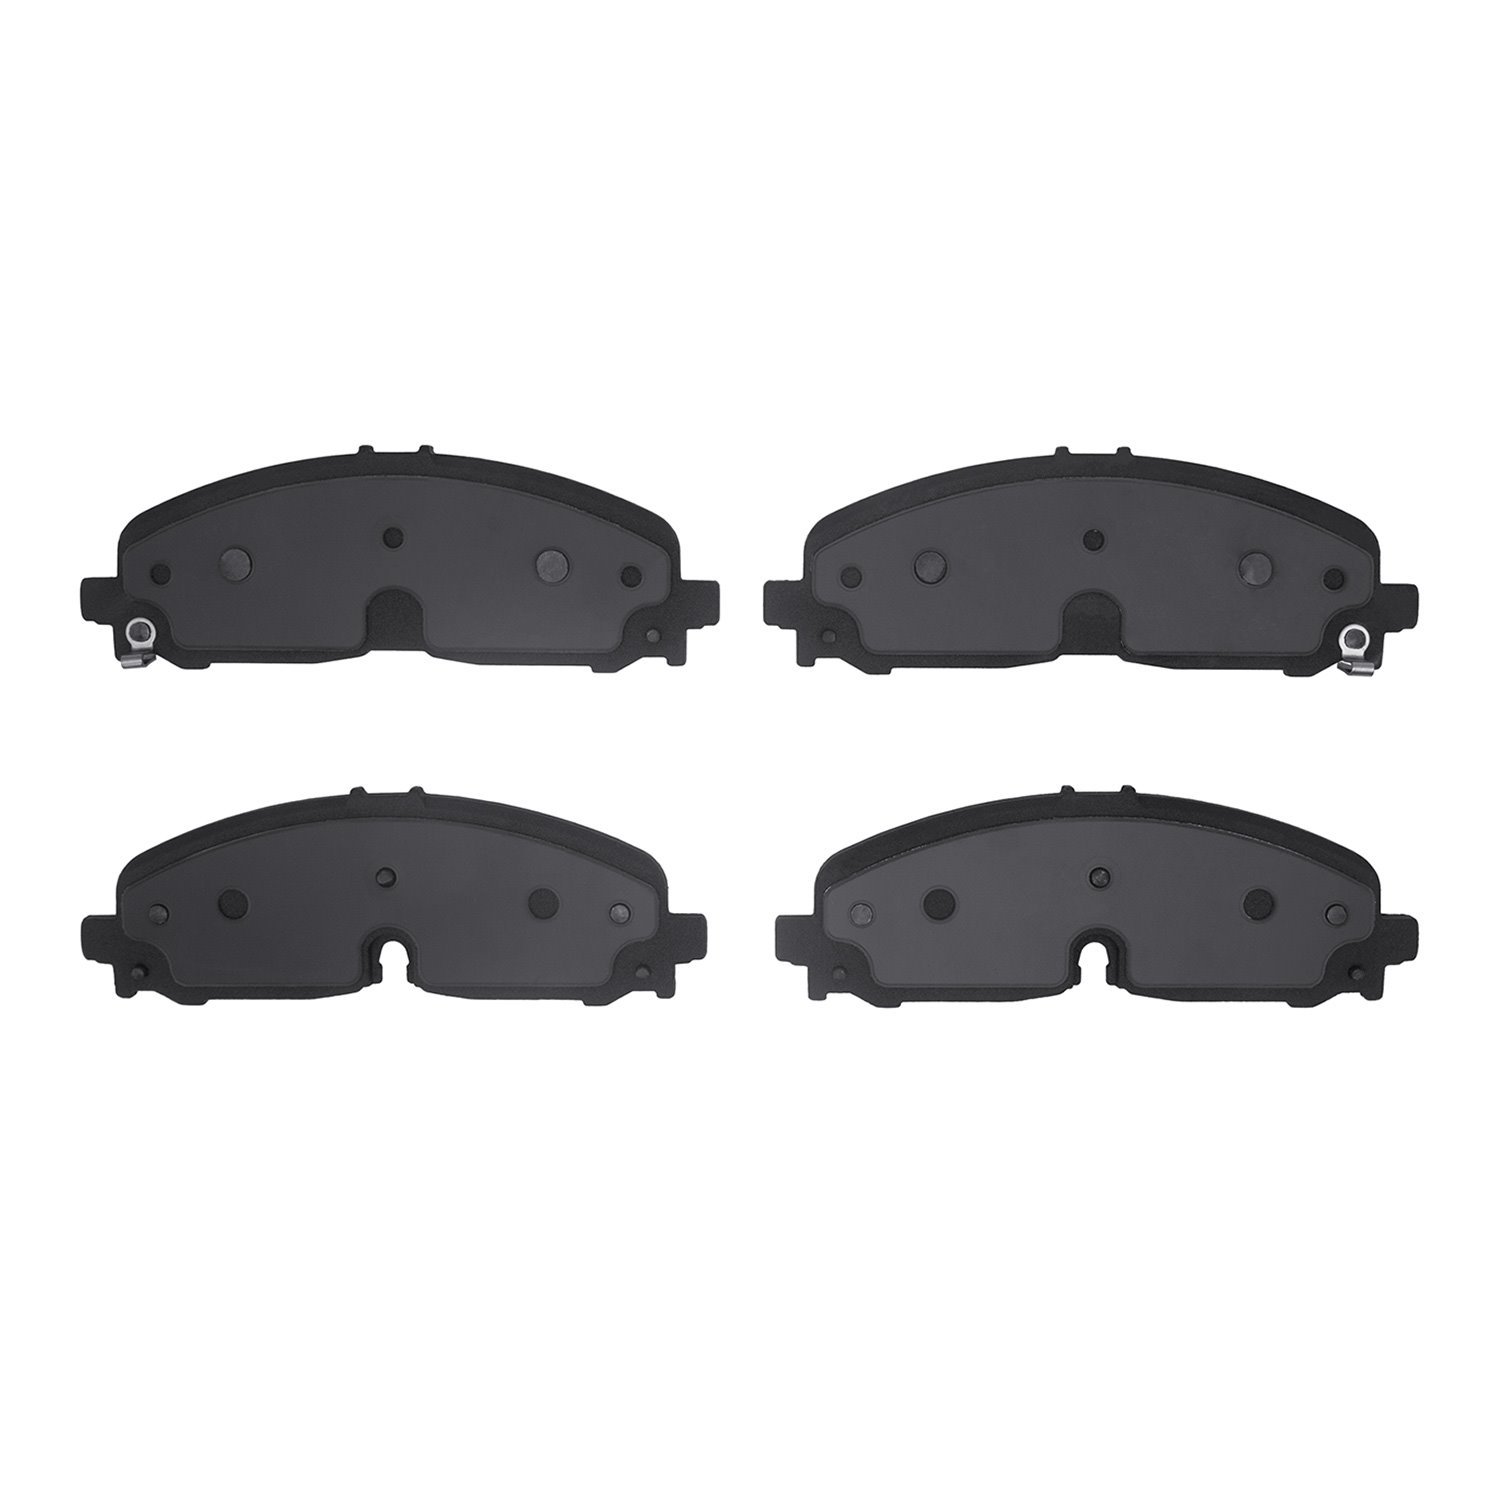 1400-2371-00 Ultimate-Duty Brake Pads Kit, Fits Select GM, Position: Front